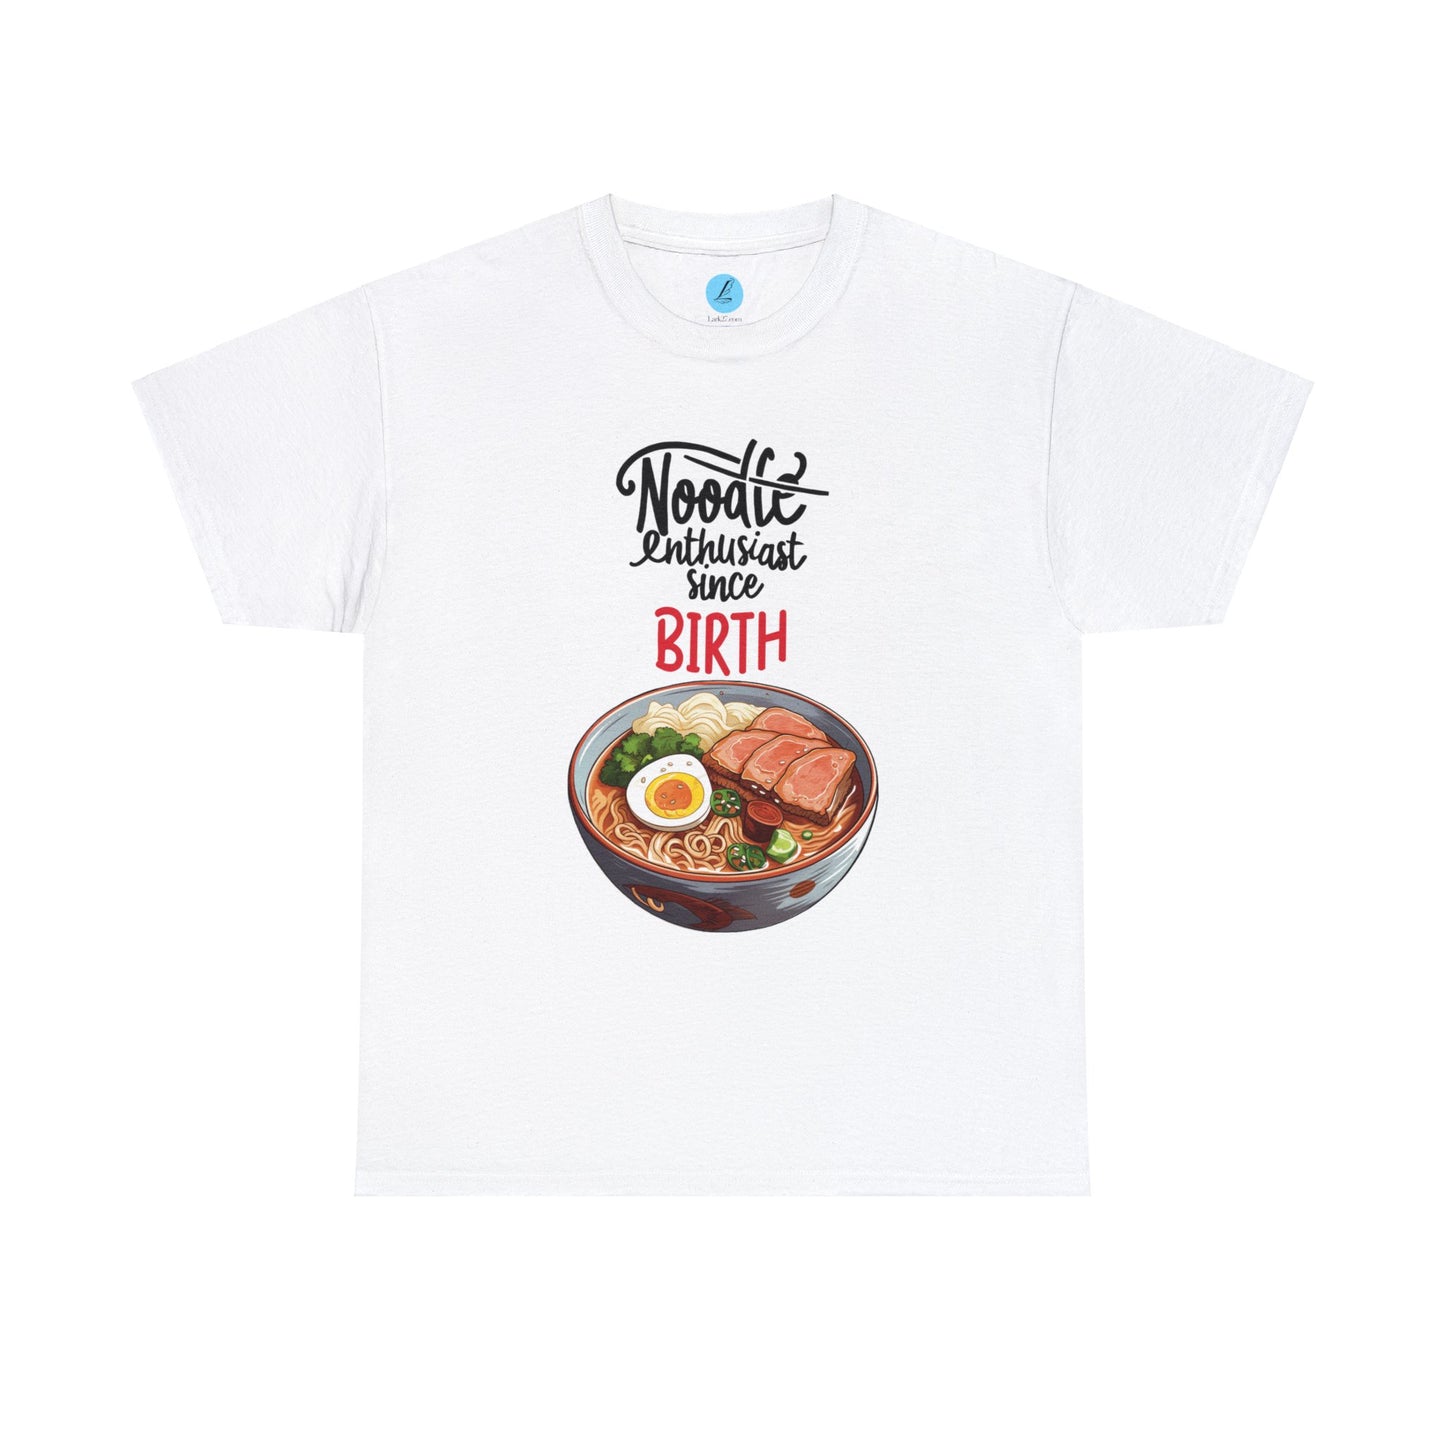 Noodle Enthusiast Since Birth Unisex Heavy Cotton Tee